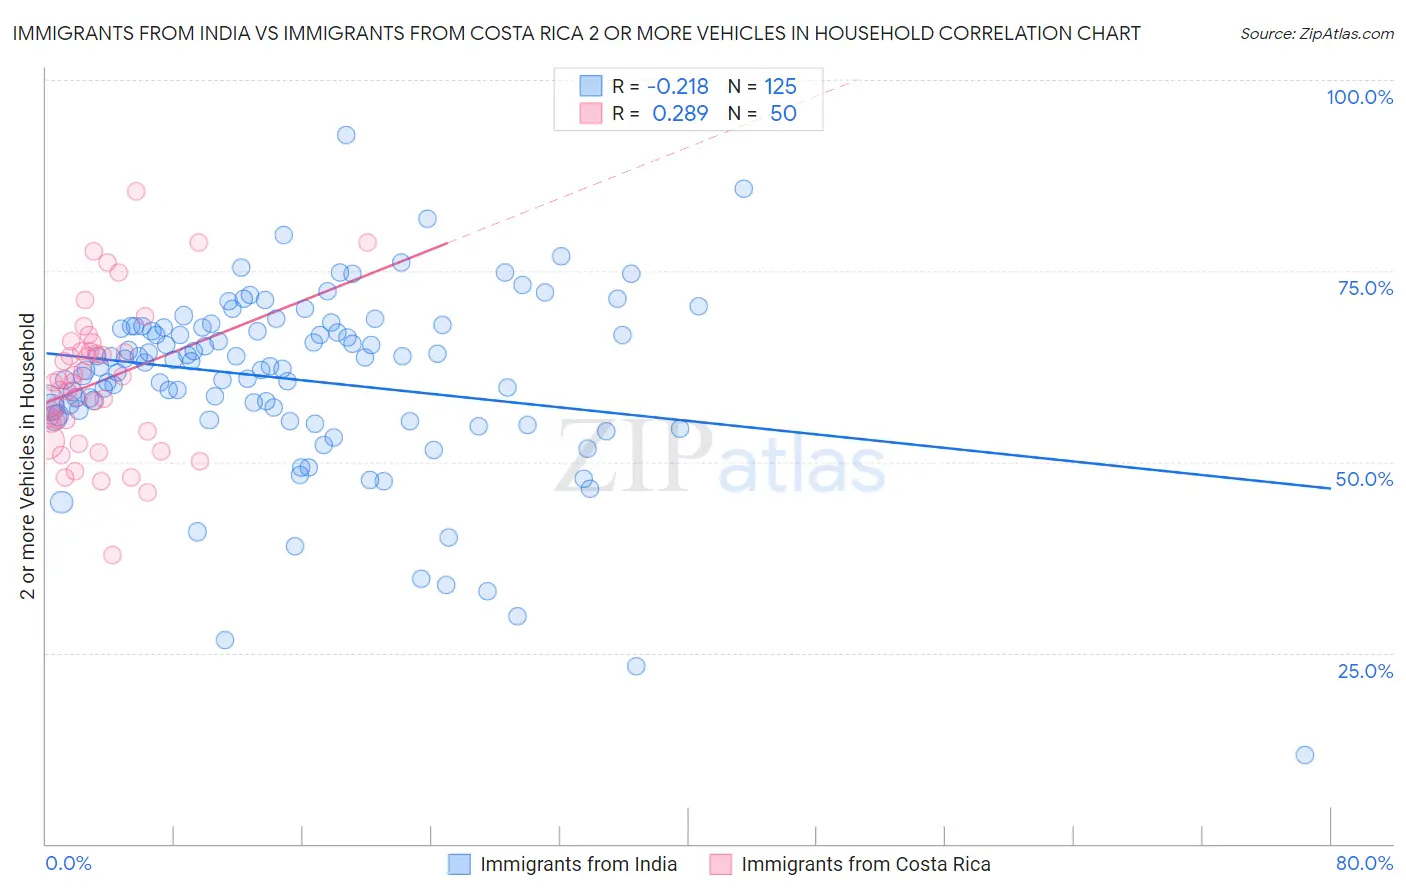 Immigrants from India vs Immigrants from Costa Rica 2 or more Vehicles in Household